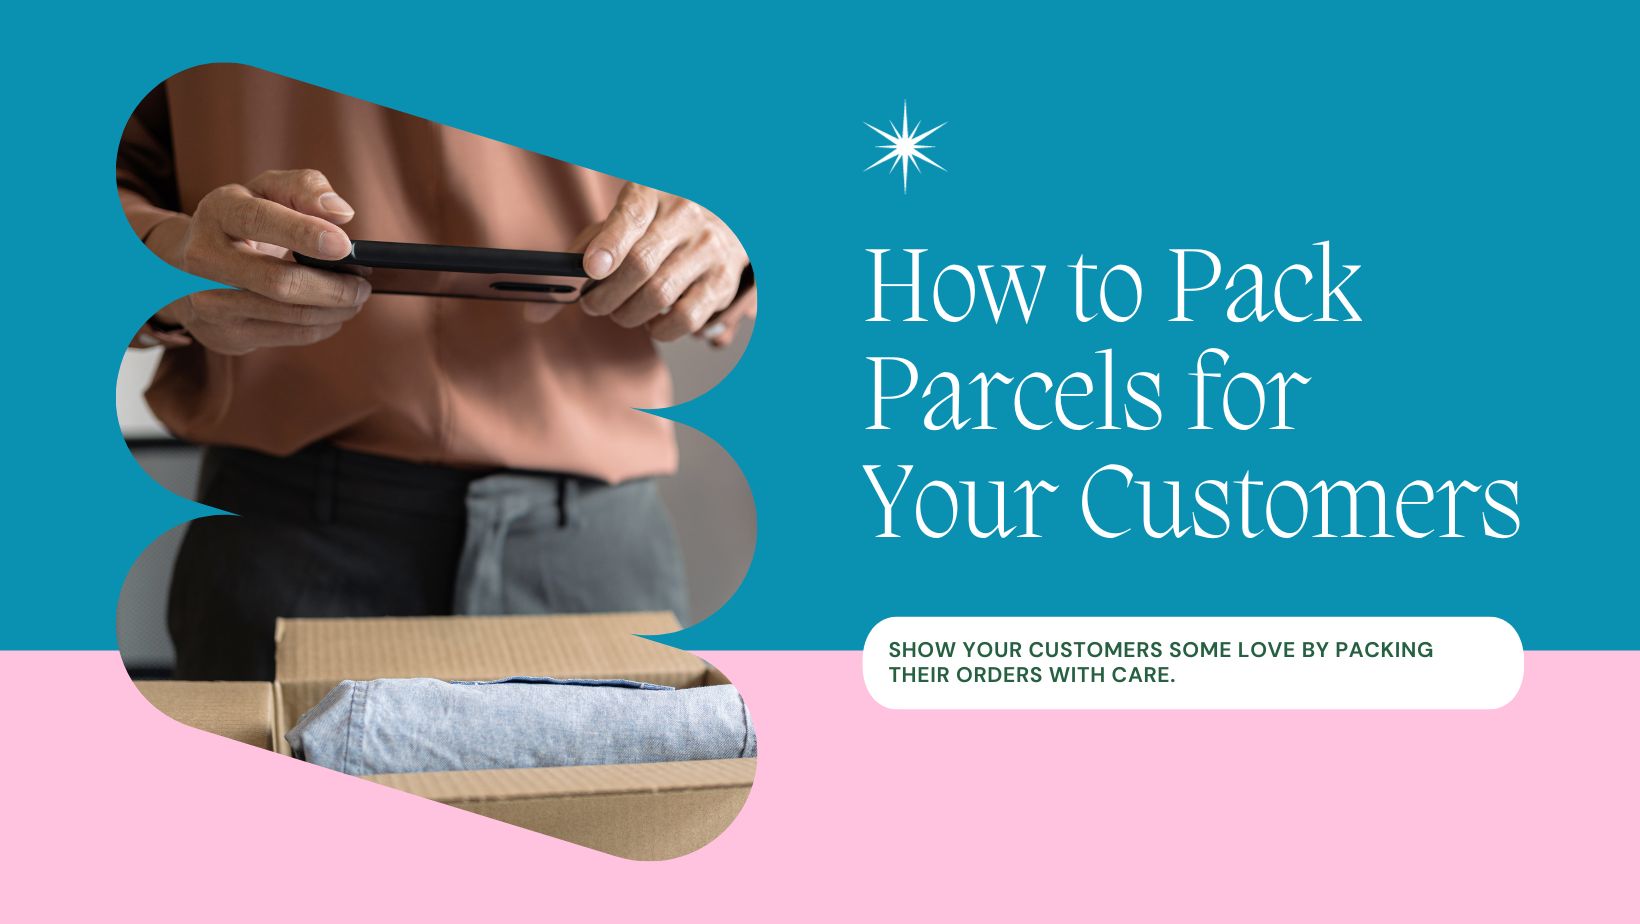 How to Pack Parcels for Your Customers and Impress Them